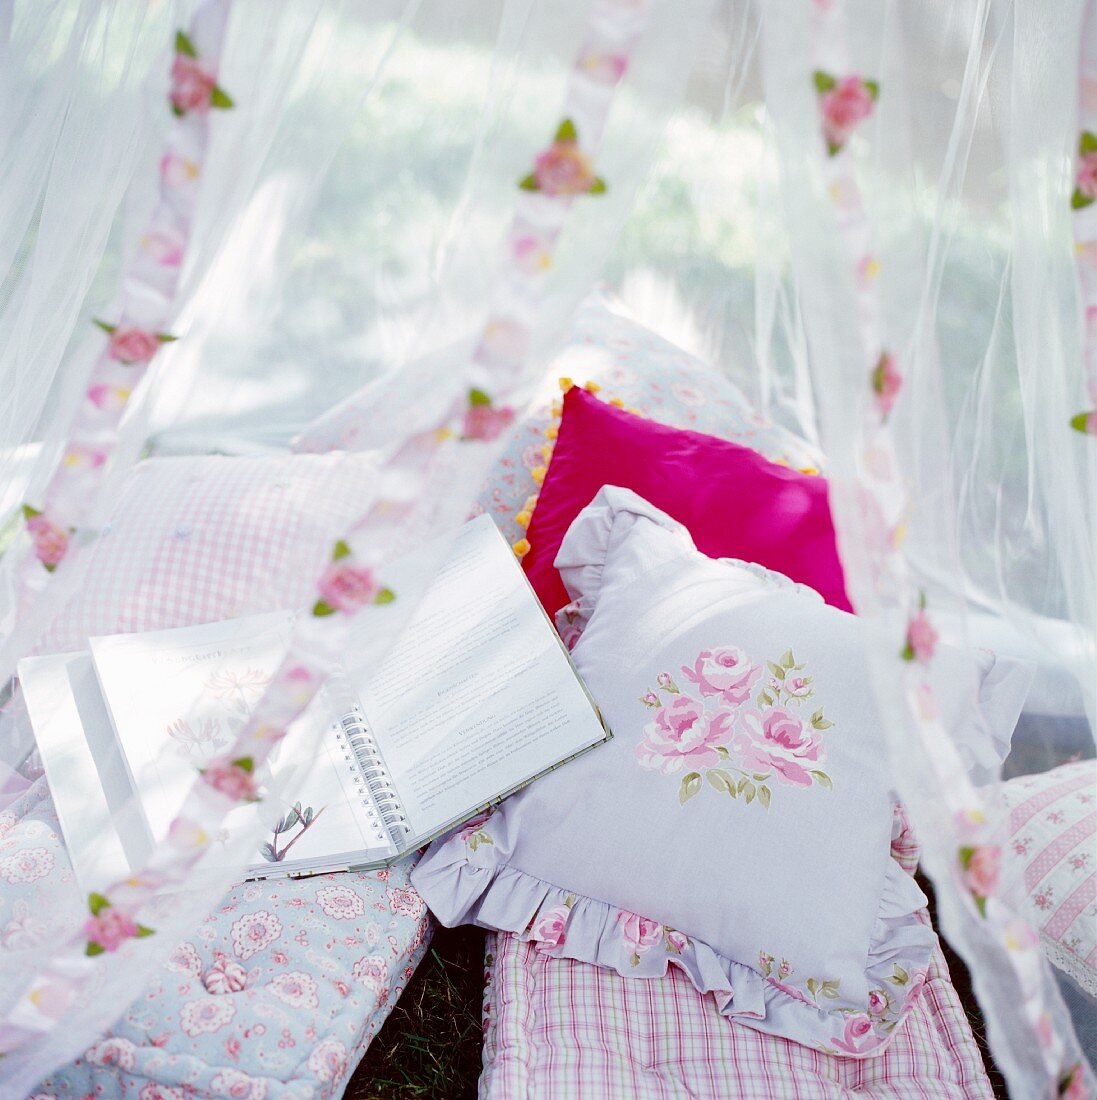 A romantic seating area with cushions under a mosquito net